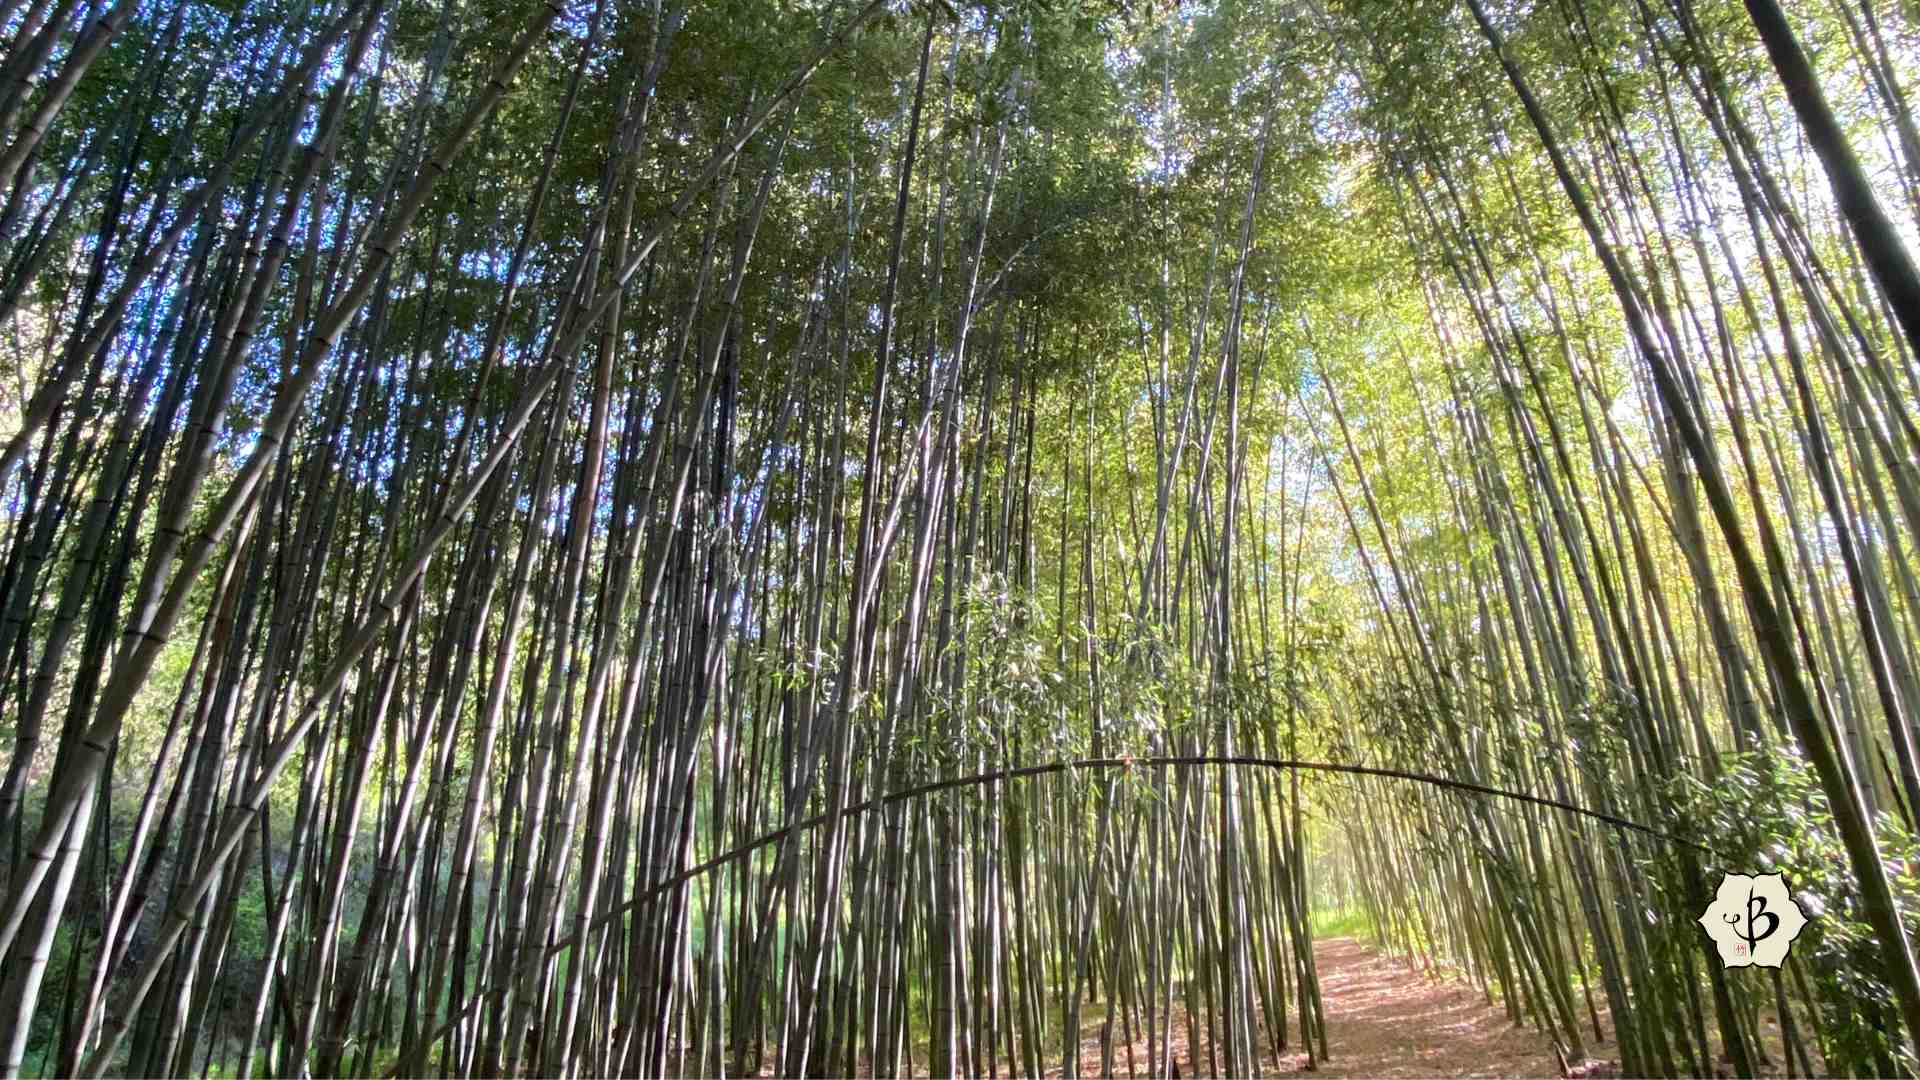 Bamboo grove for oxygen and ecology